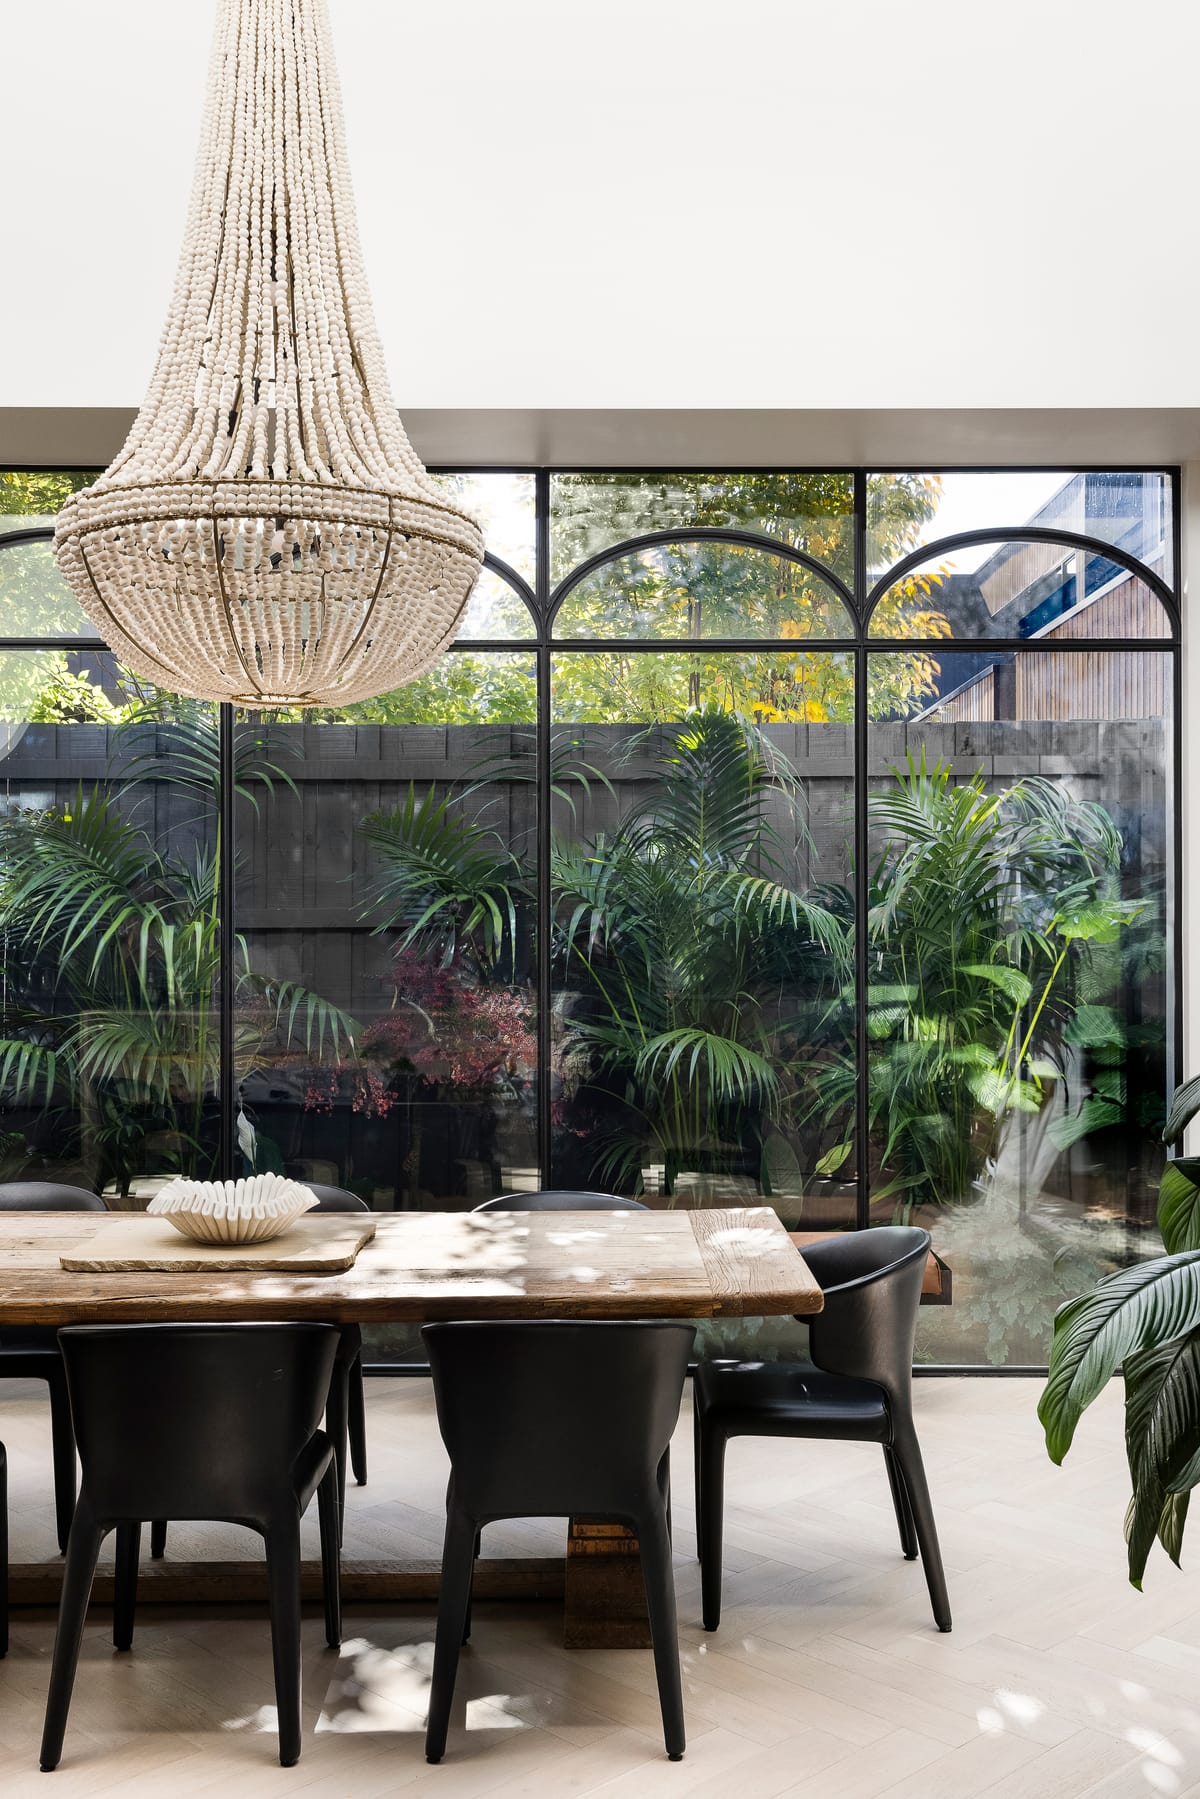 Goldsmith Residence by C.Kairouz Architects. Photography by Spacecraft. Dining table overlooking lush garden.